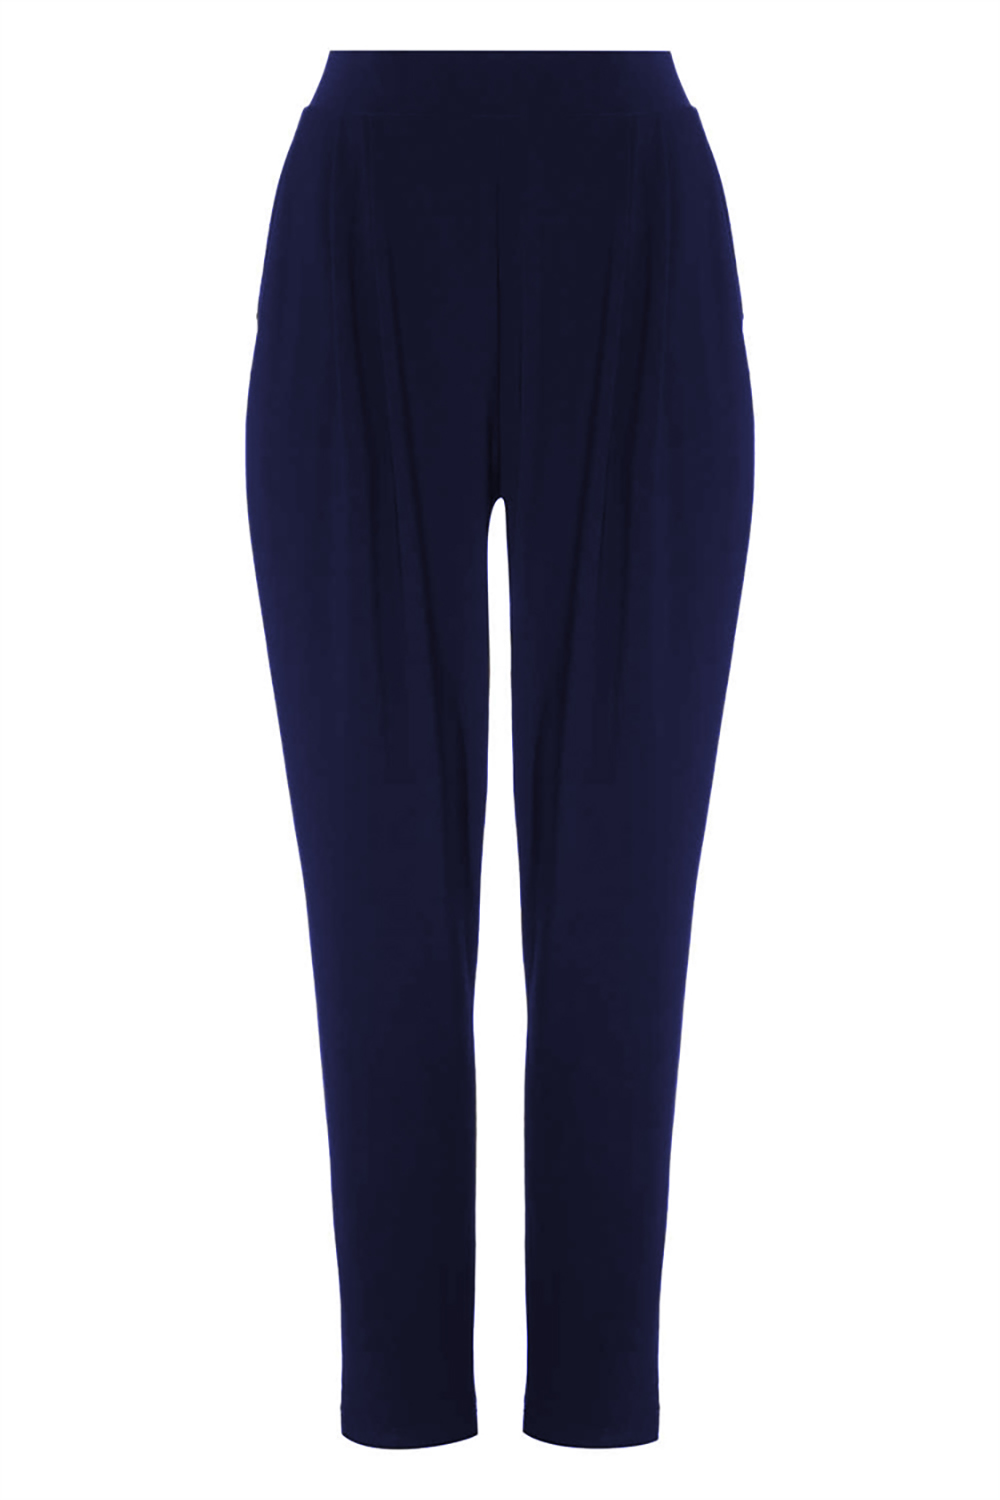 Navy  Jersey Stretch Harem Trousers, Image 6 of 6